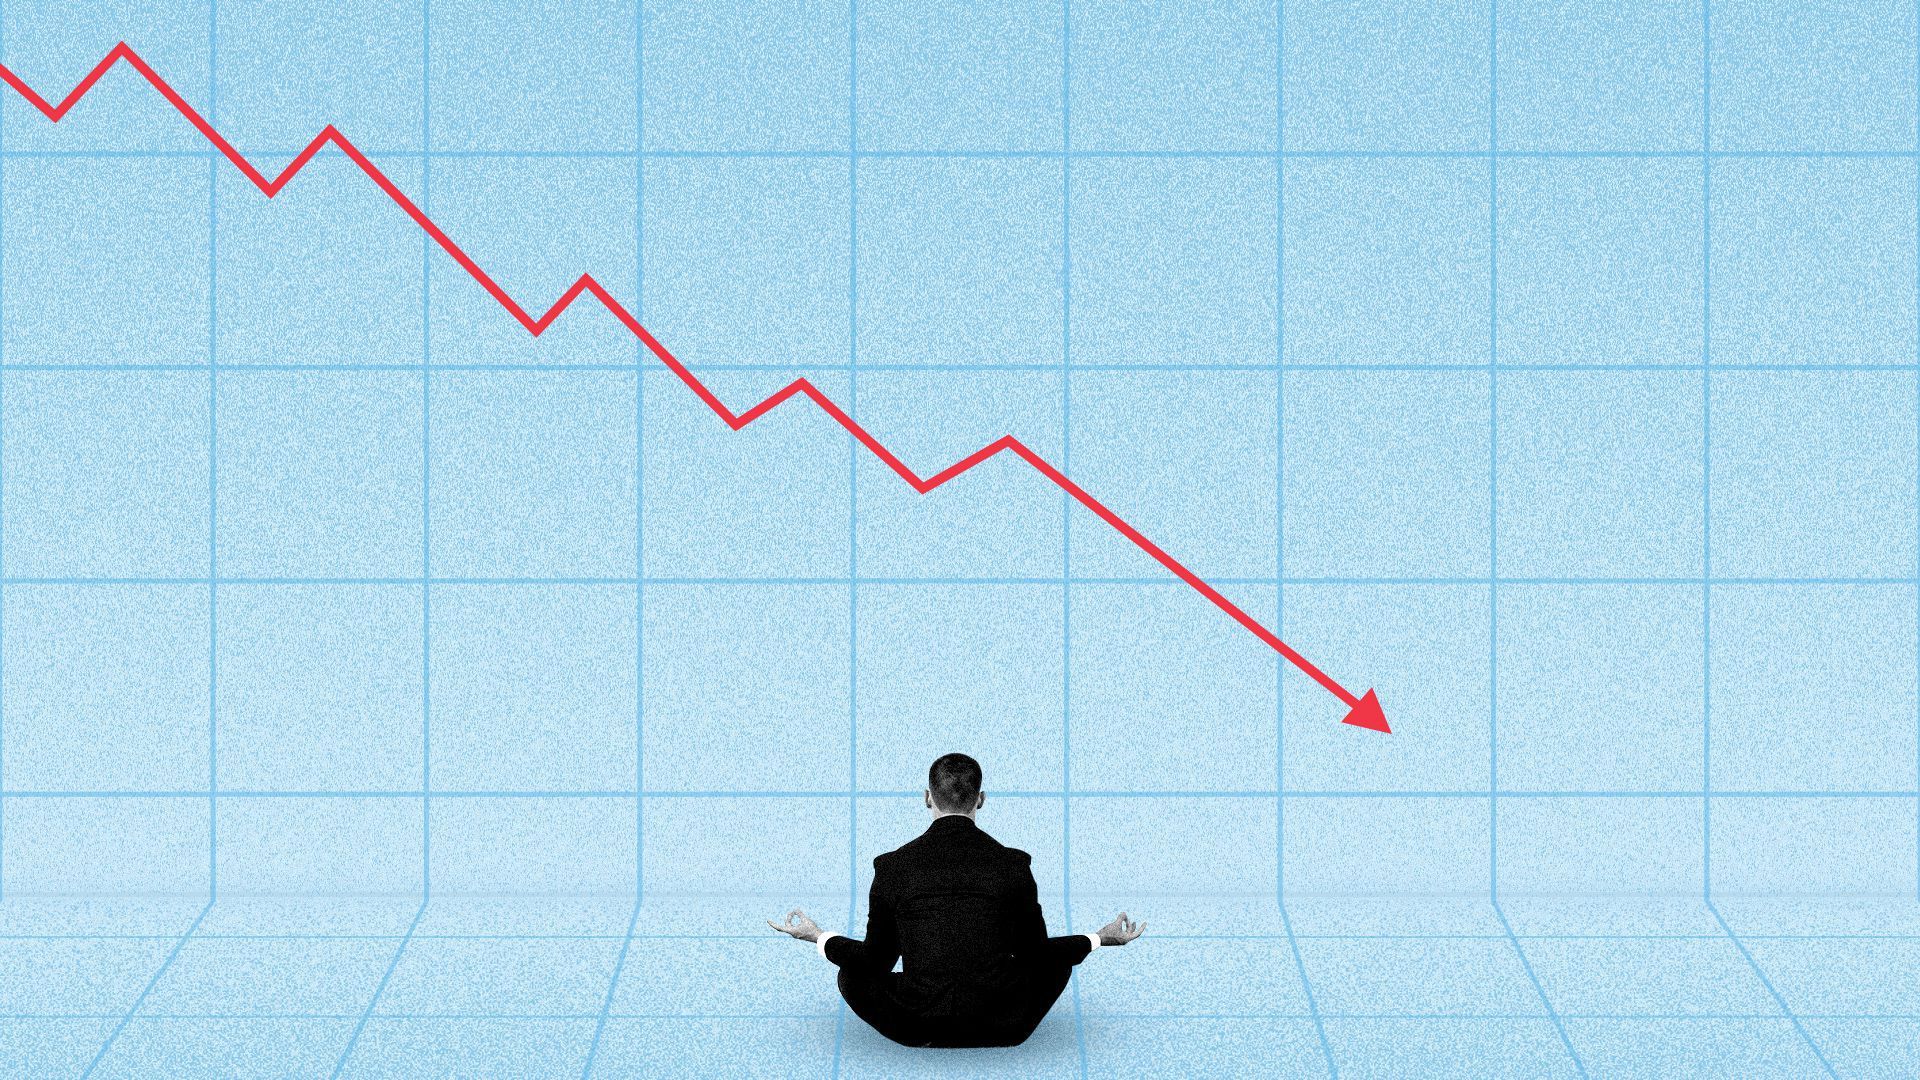 person sitting cross-legged facing a downward trending line graph